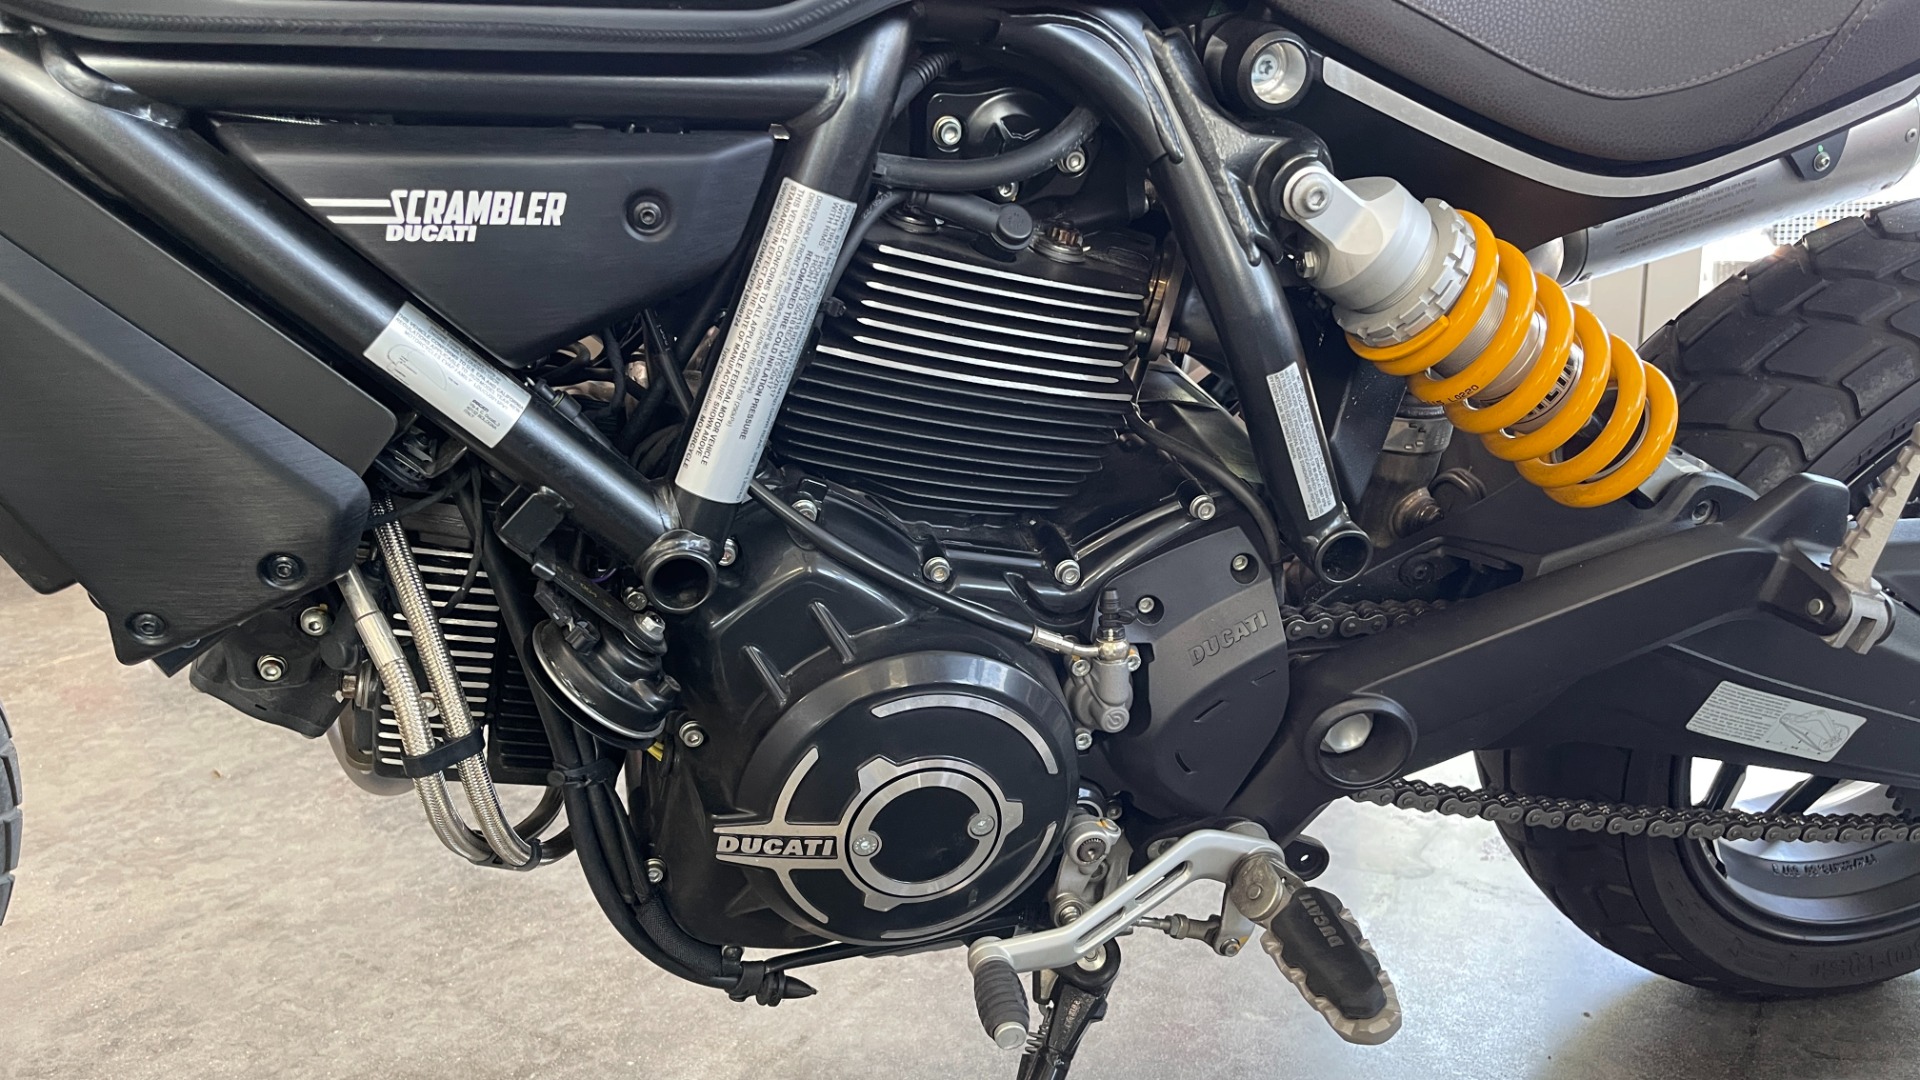 Used 2020 DUCATI SCRAMBLER 1100 SPORT PRO for sale Sold at Formula Imports in Charlotte NC 28227 6